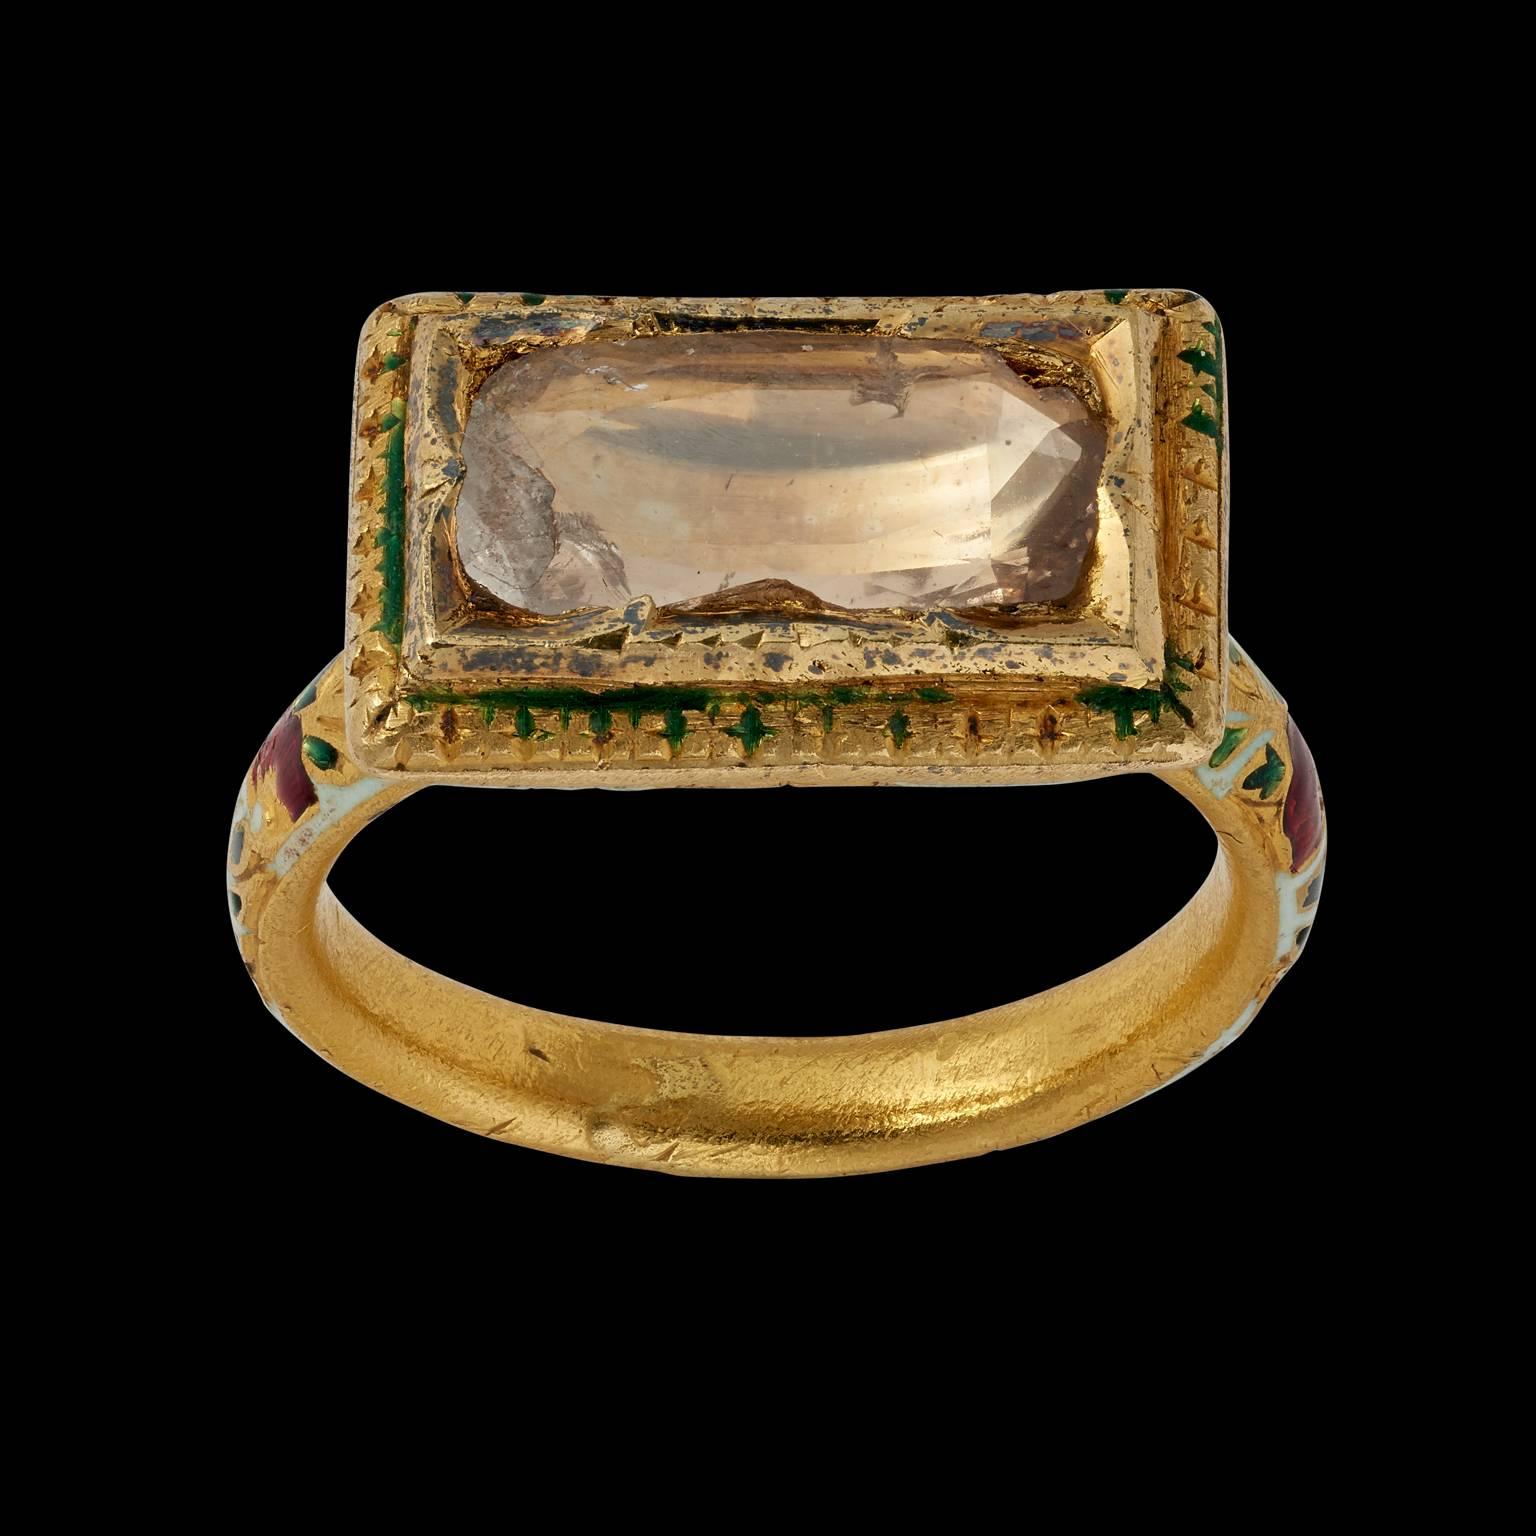 Ring
Rajasthan, North India
19th century

Ring in pure gold set with a single table-cut, slightly faceted, gold-foiled diamond. The ring is delicately enamelled on the reverse in poppy-bud motifs and acanthus leaves of red, white and green on a